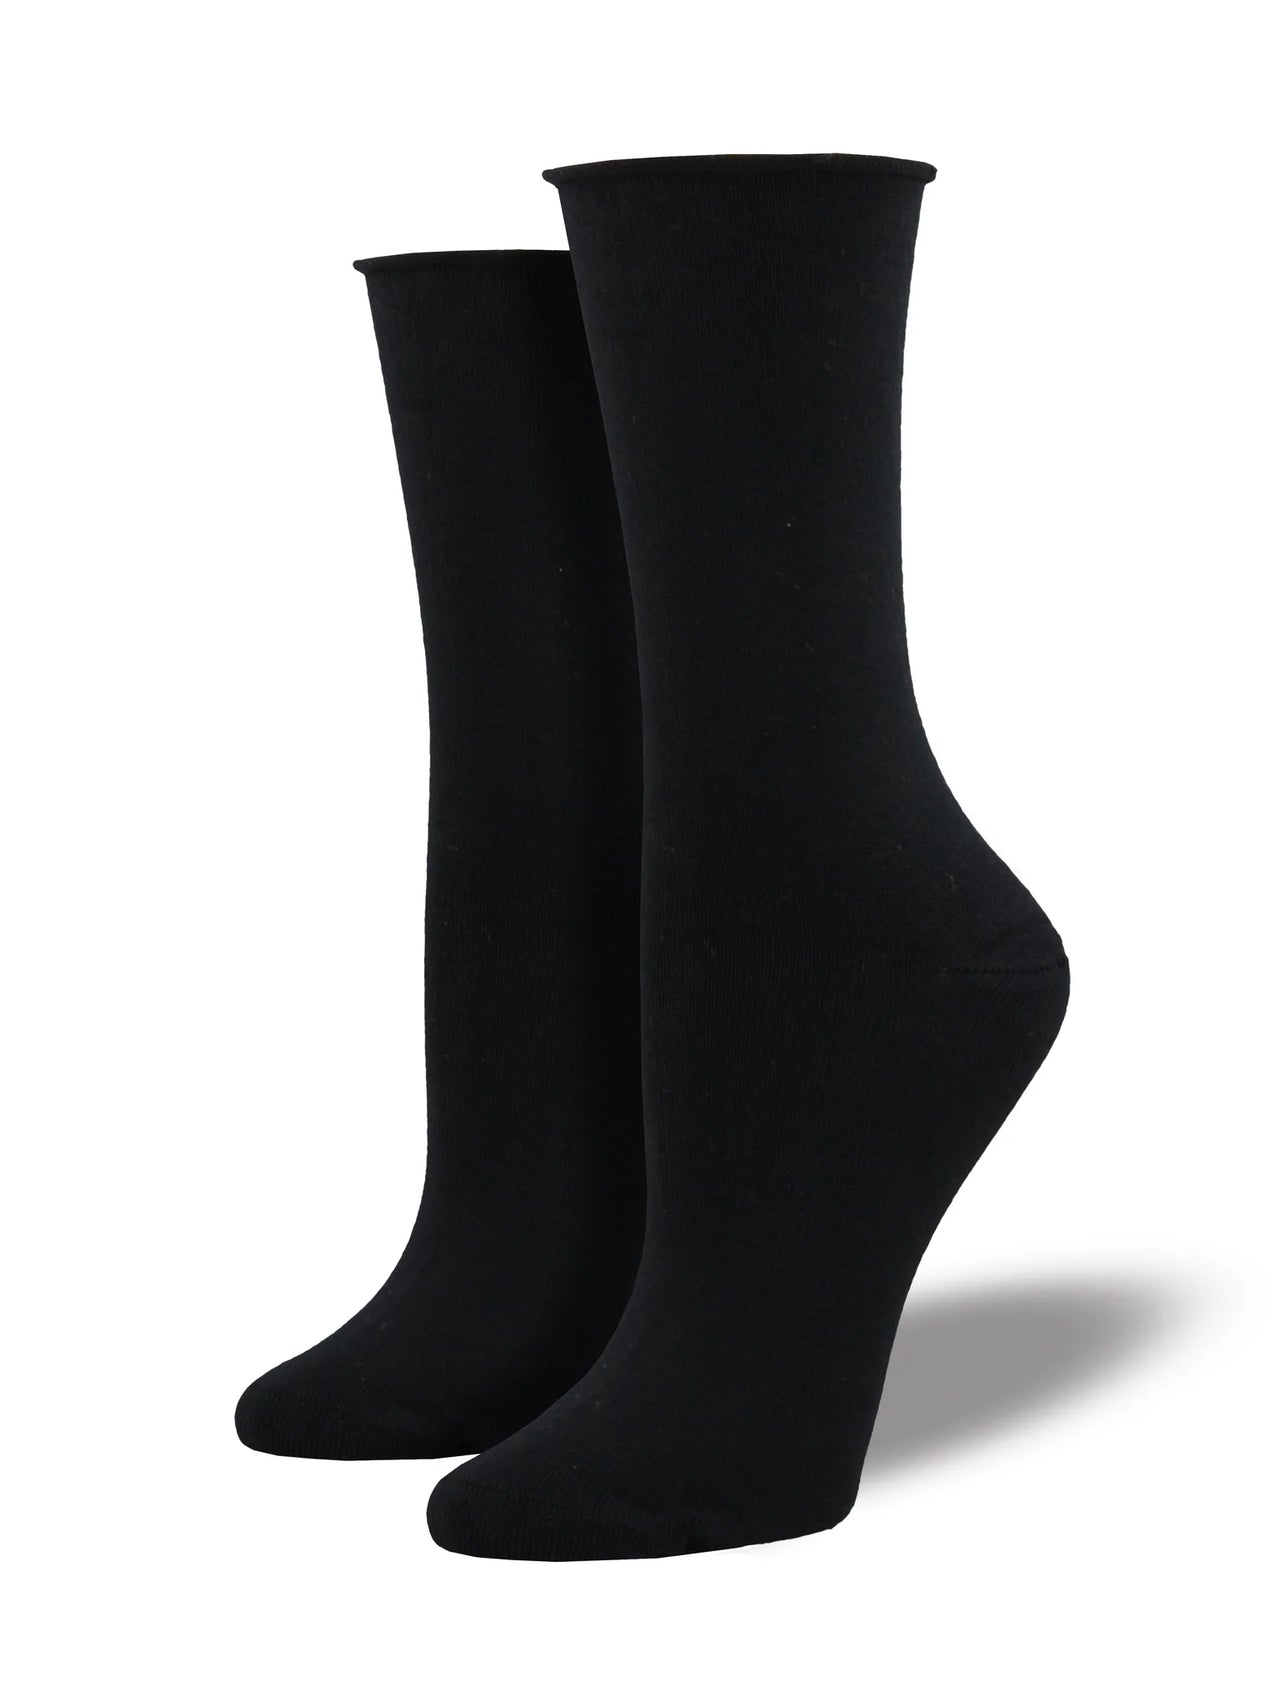 Women's Solid Color Bamboo Socks